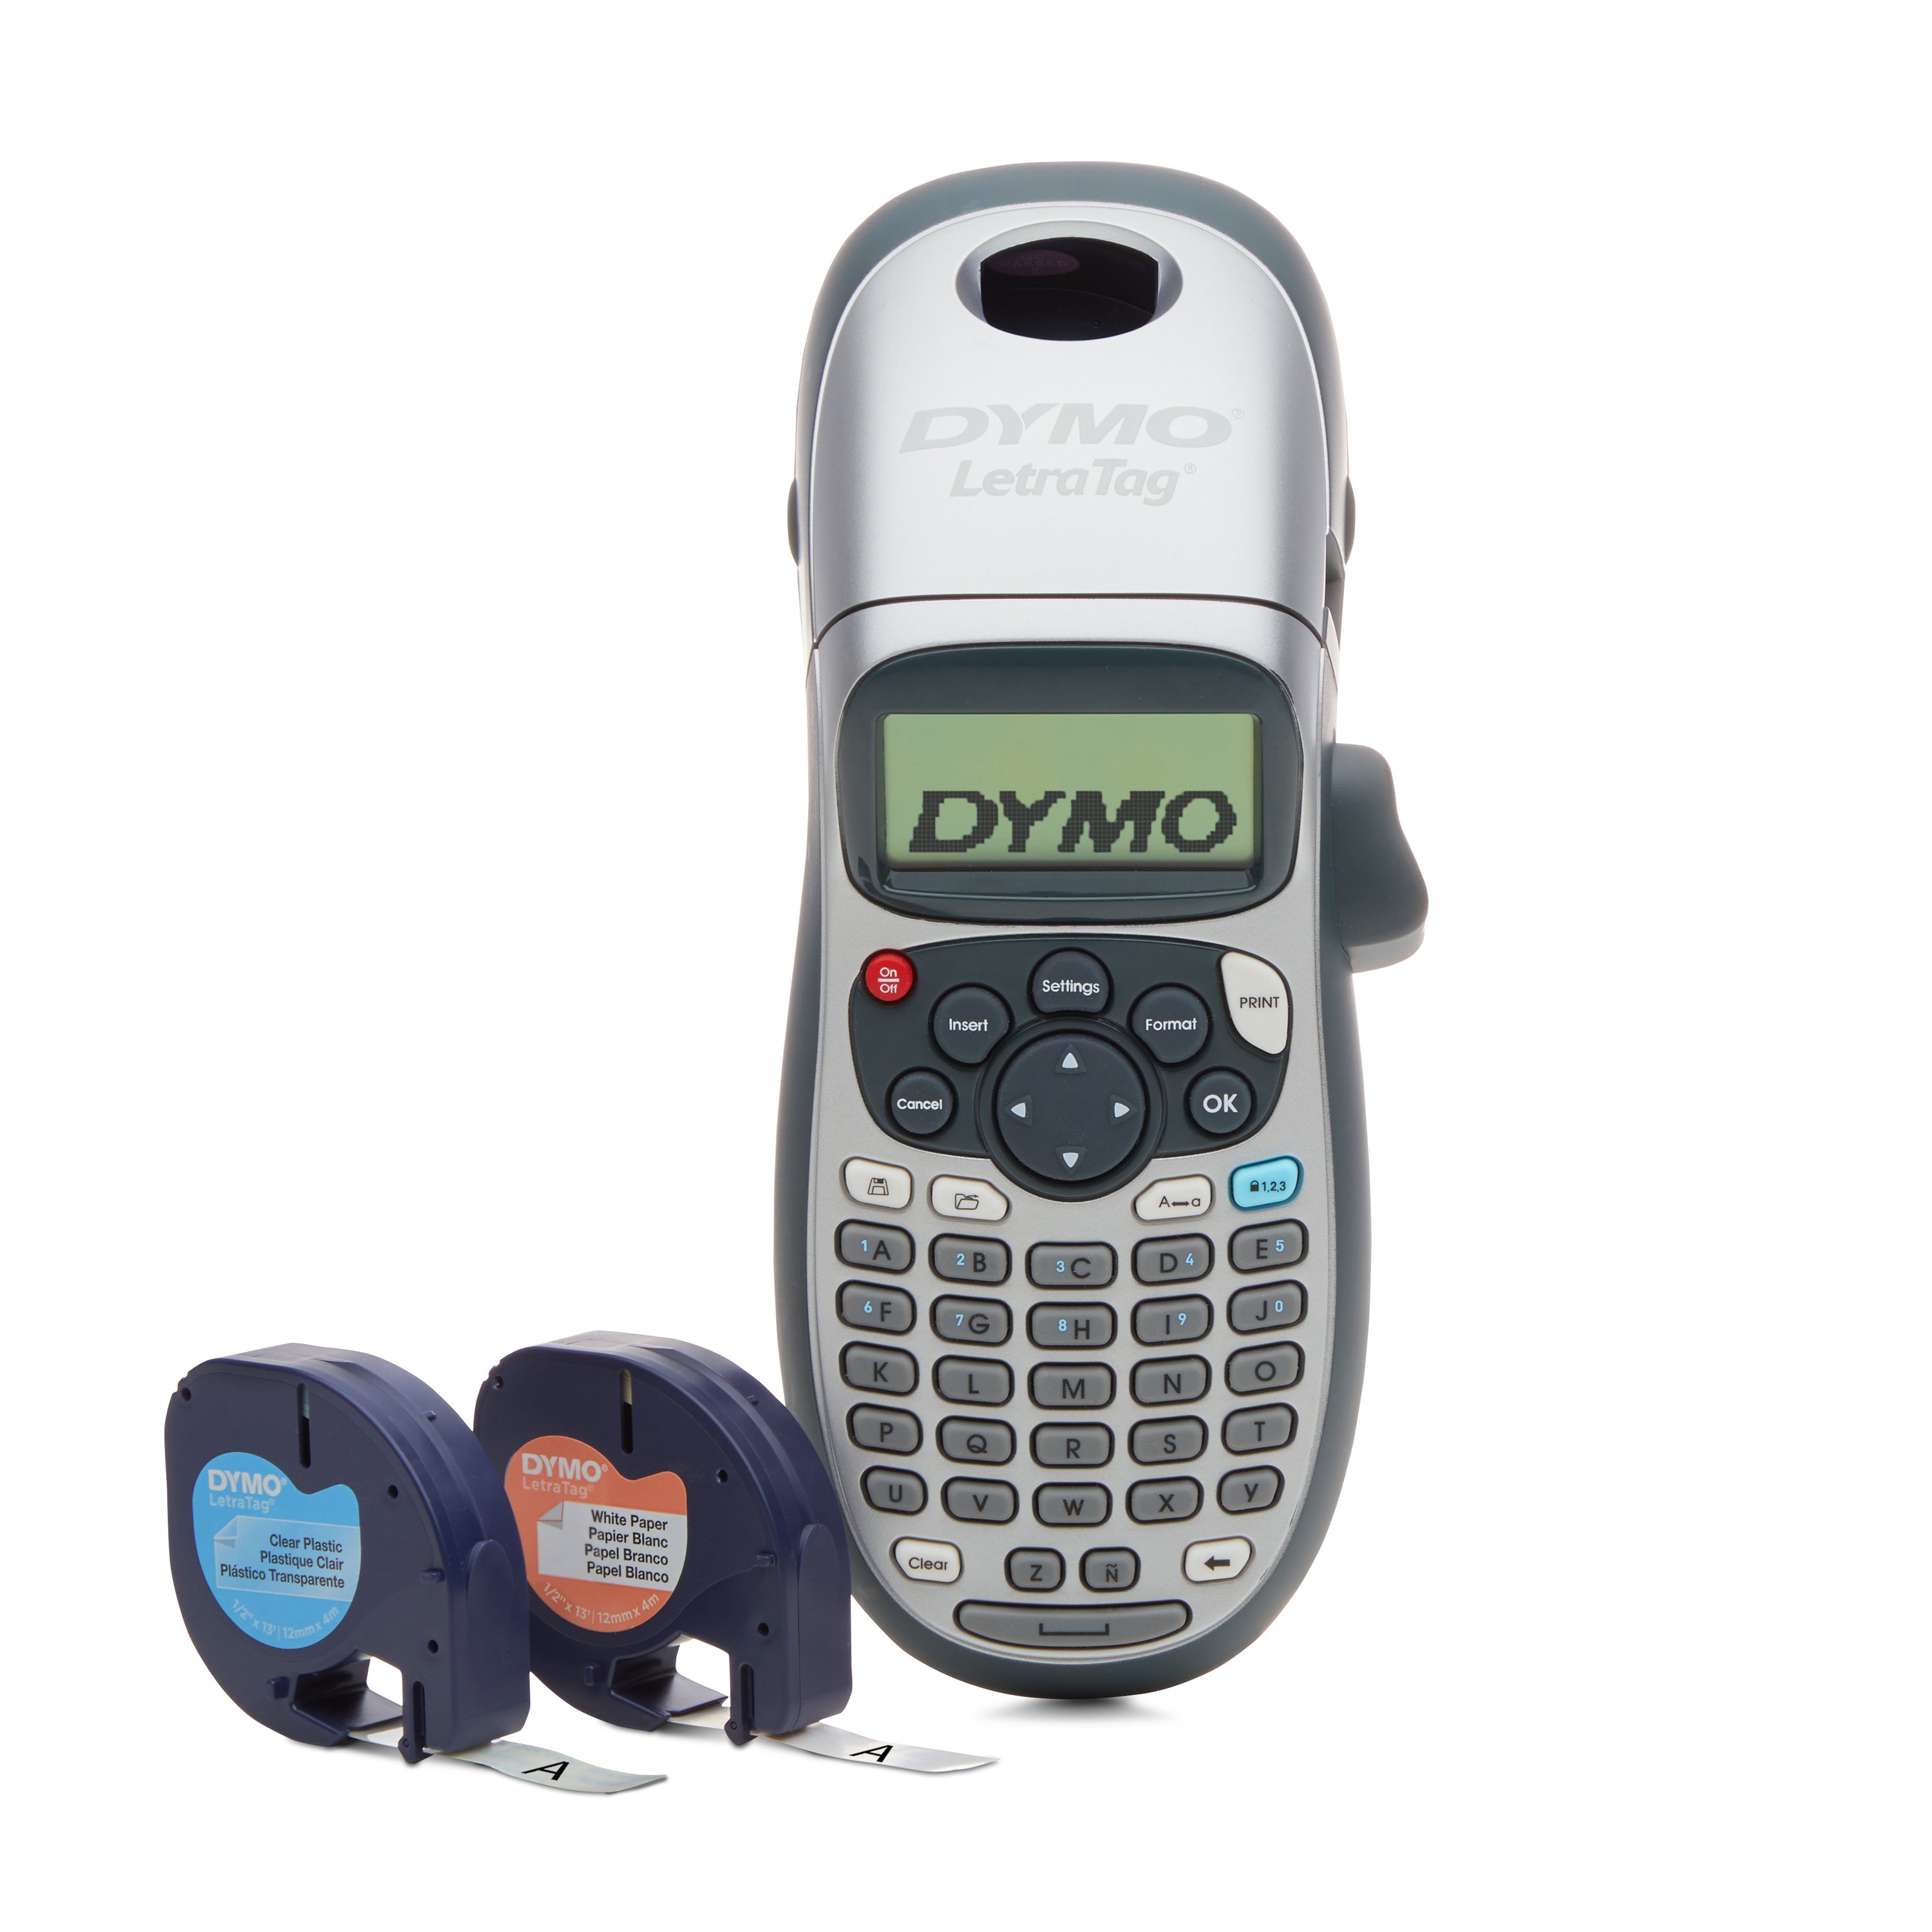 Dymo Dymo Letra Tag Esselte Label Maker Silver Handheld Portable Battery Tested Works 